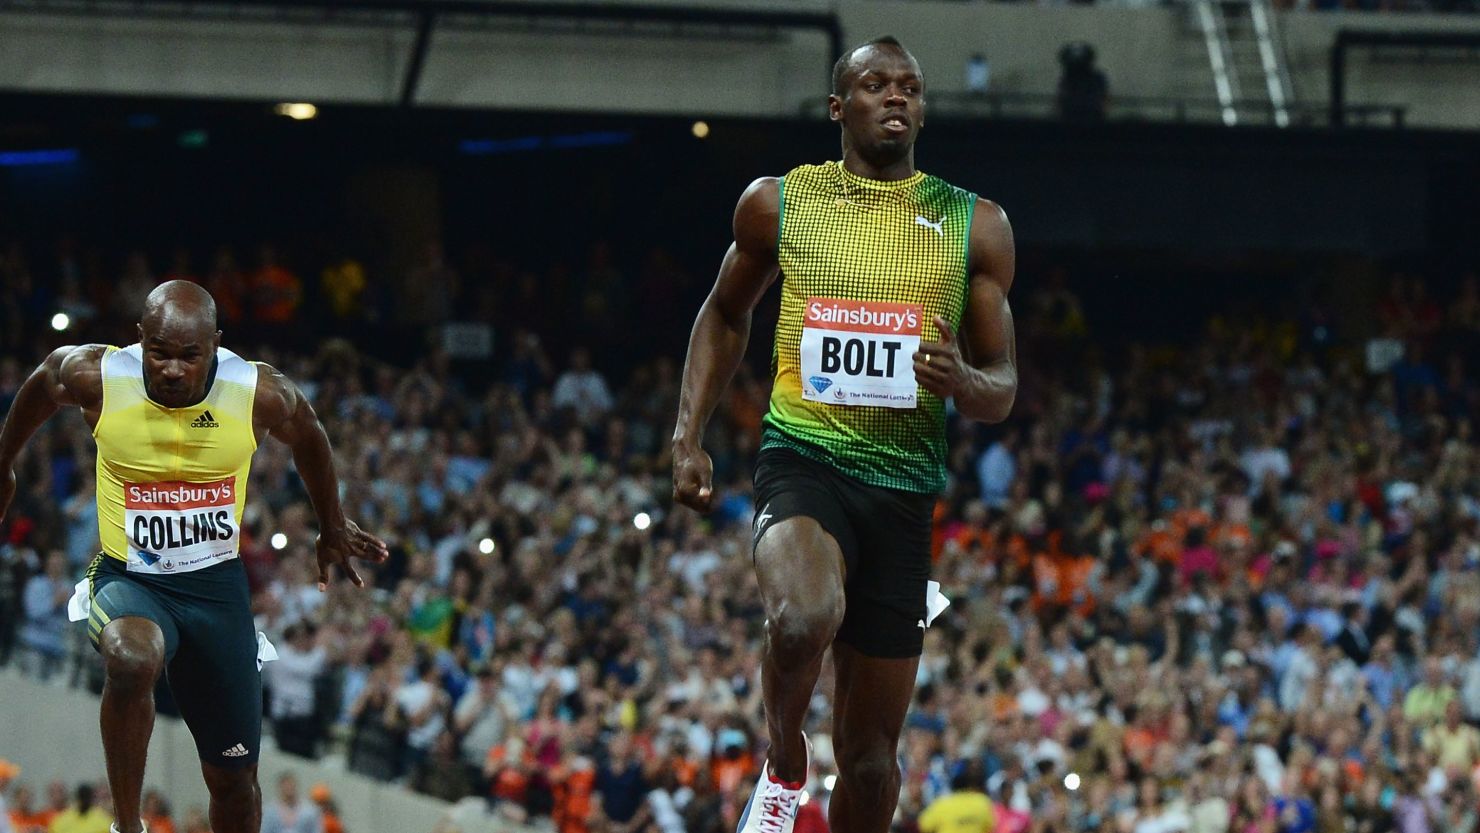 Usain Bolt crosses the line first in the 100m event at the London Anniversary Games in a time of 9.85 seconds.